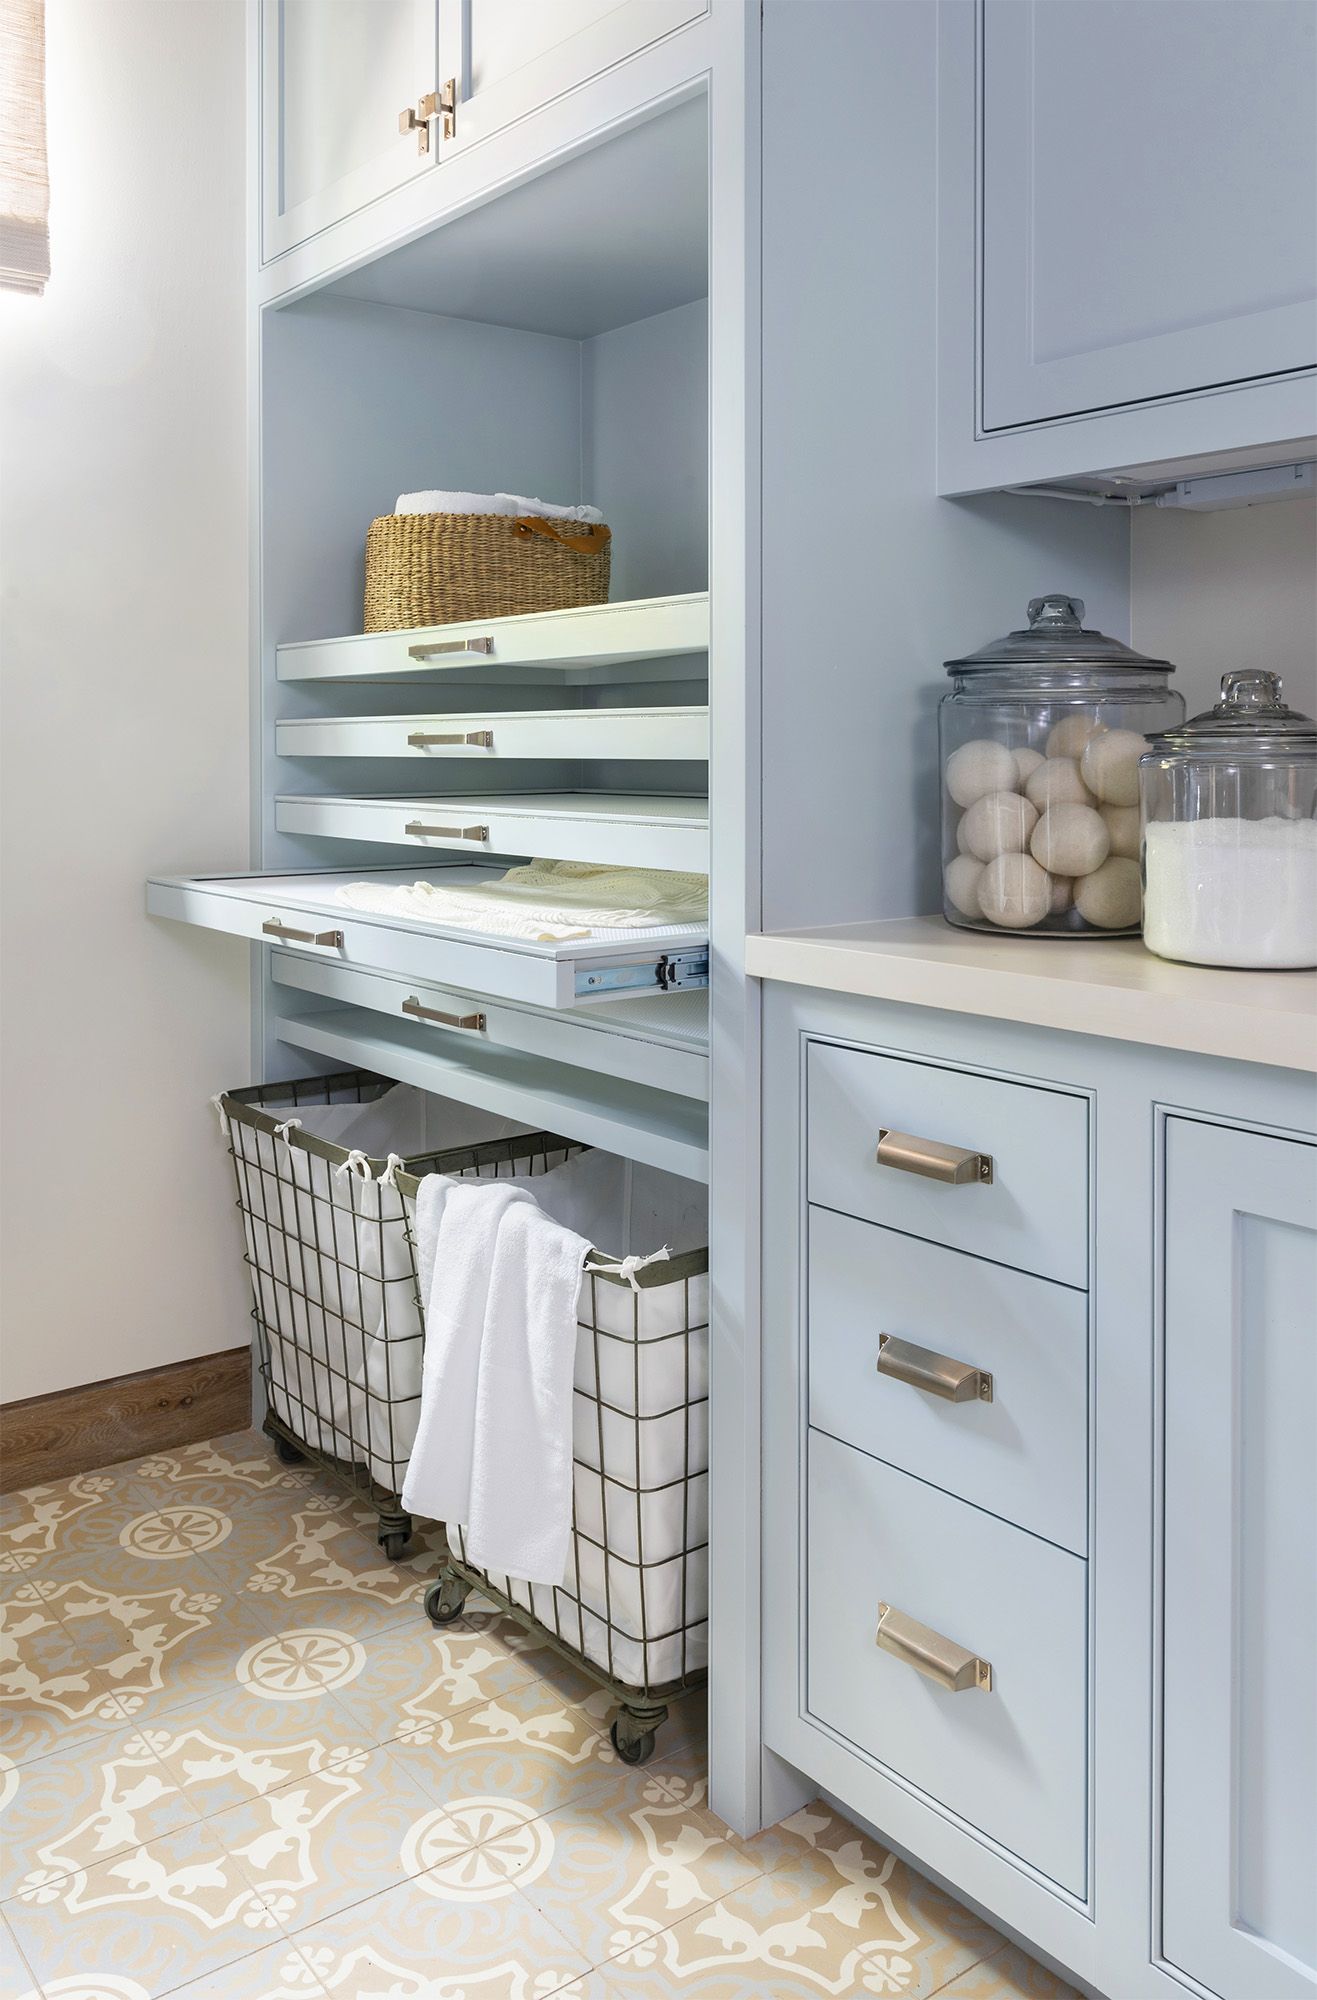 27 Clever Laundry Room Ideas How To Organize A - Diy Laundry Room Cabinet Ideas